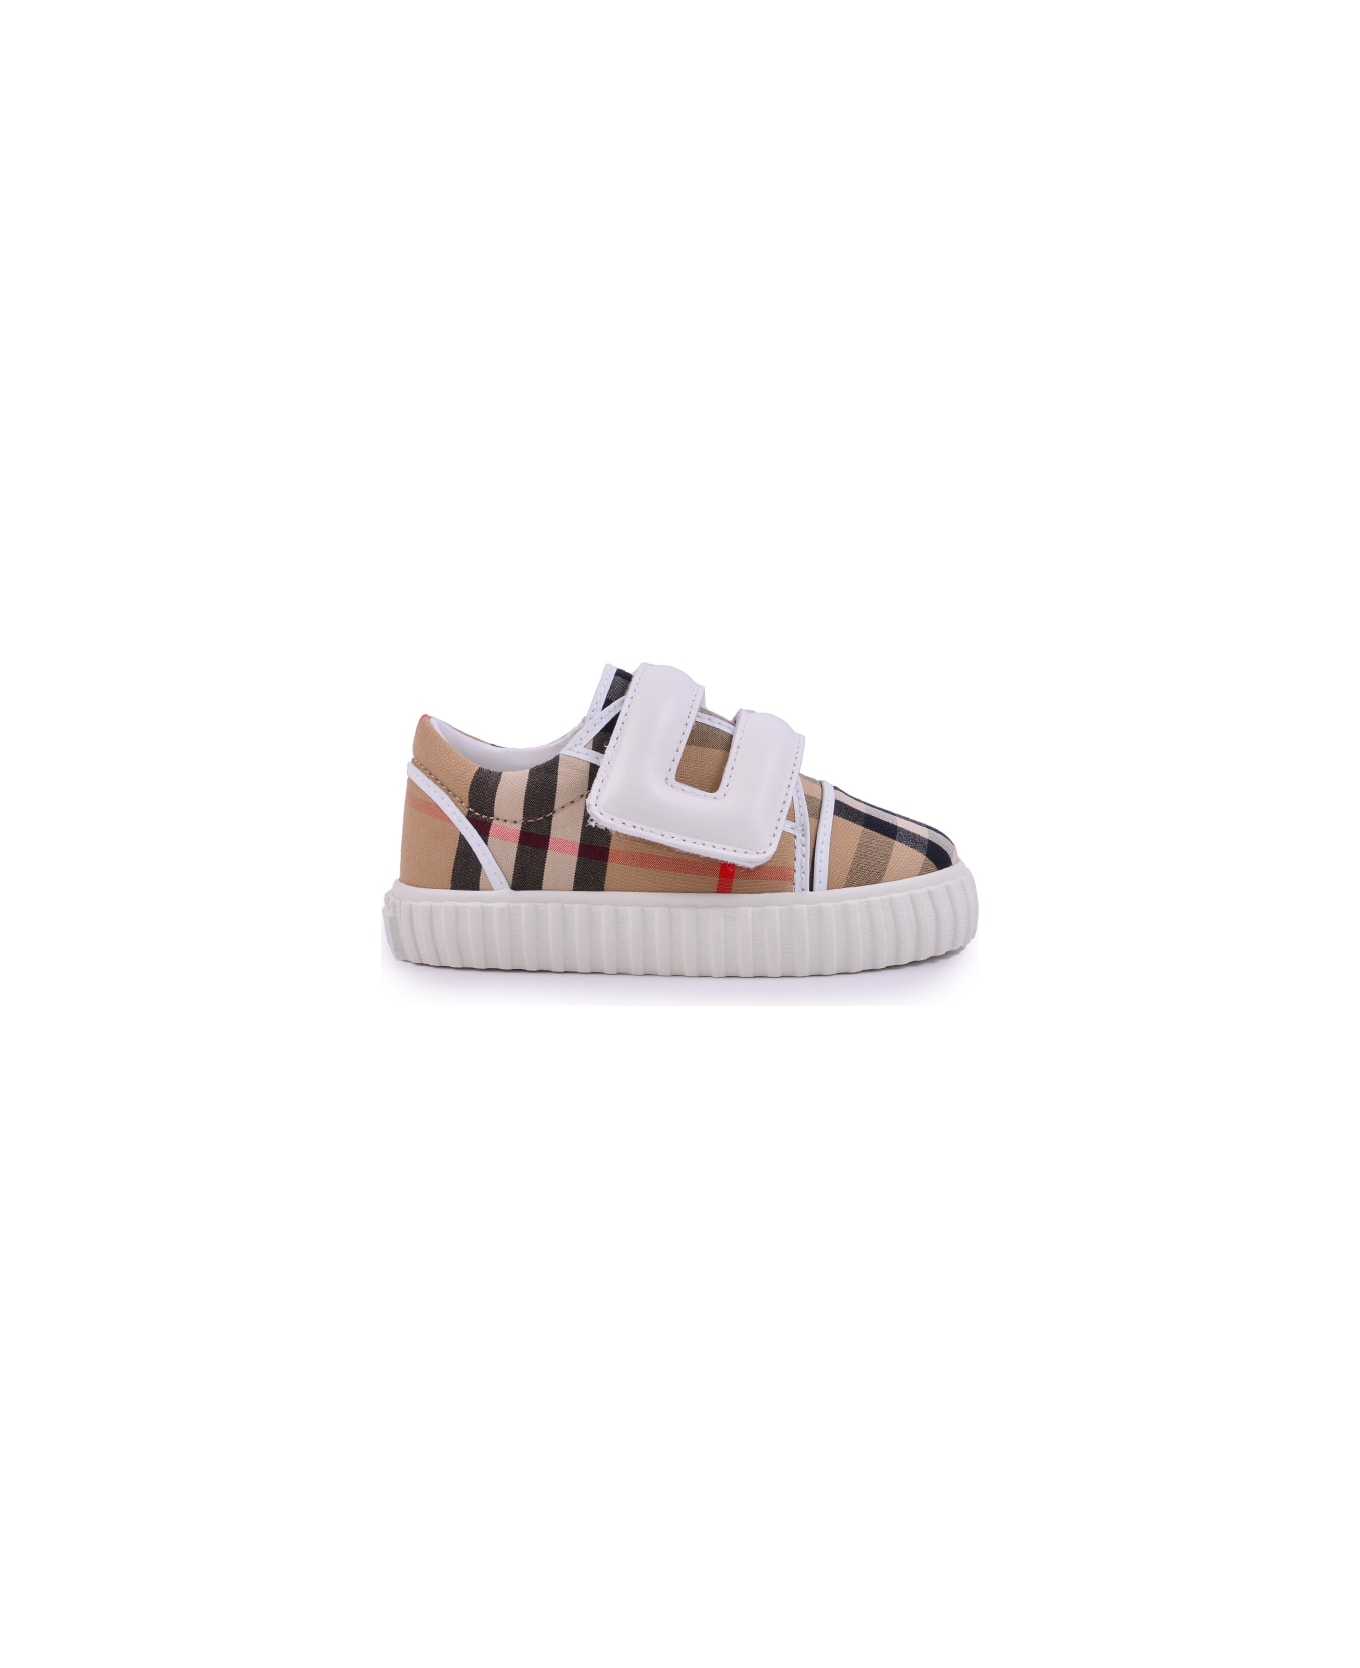 Burberry Leather Sneaker With Vintage Check Pattern - Beige